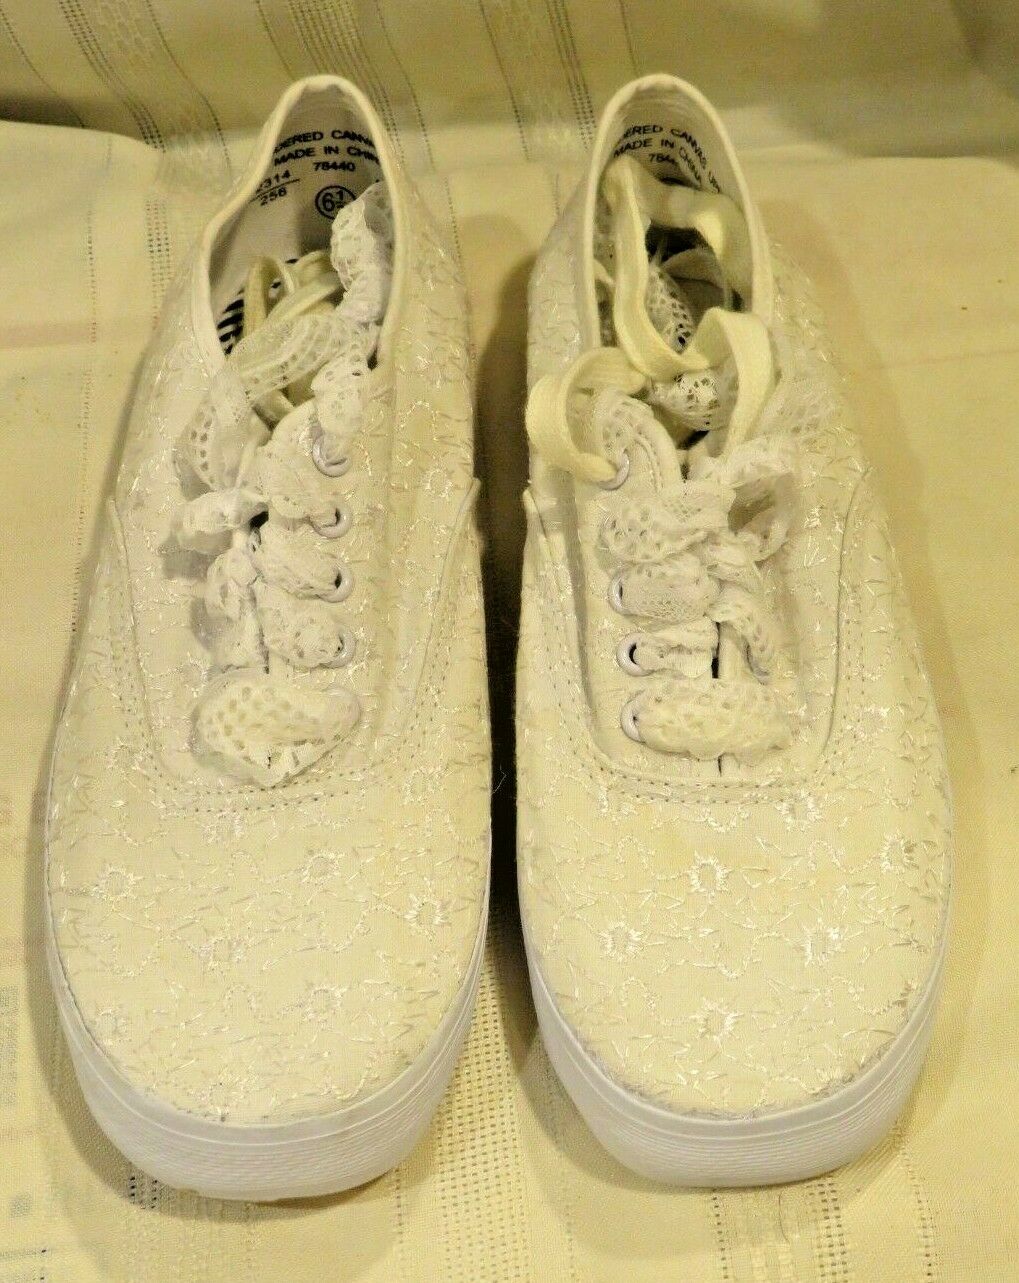 Balloon Shoes White Embroidered Sneakers w/ two sets of laces. 6 1/2